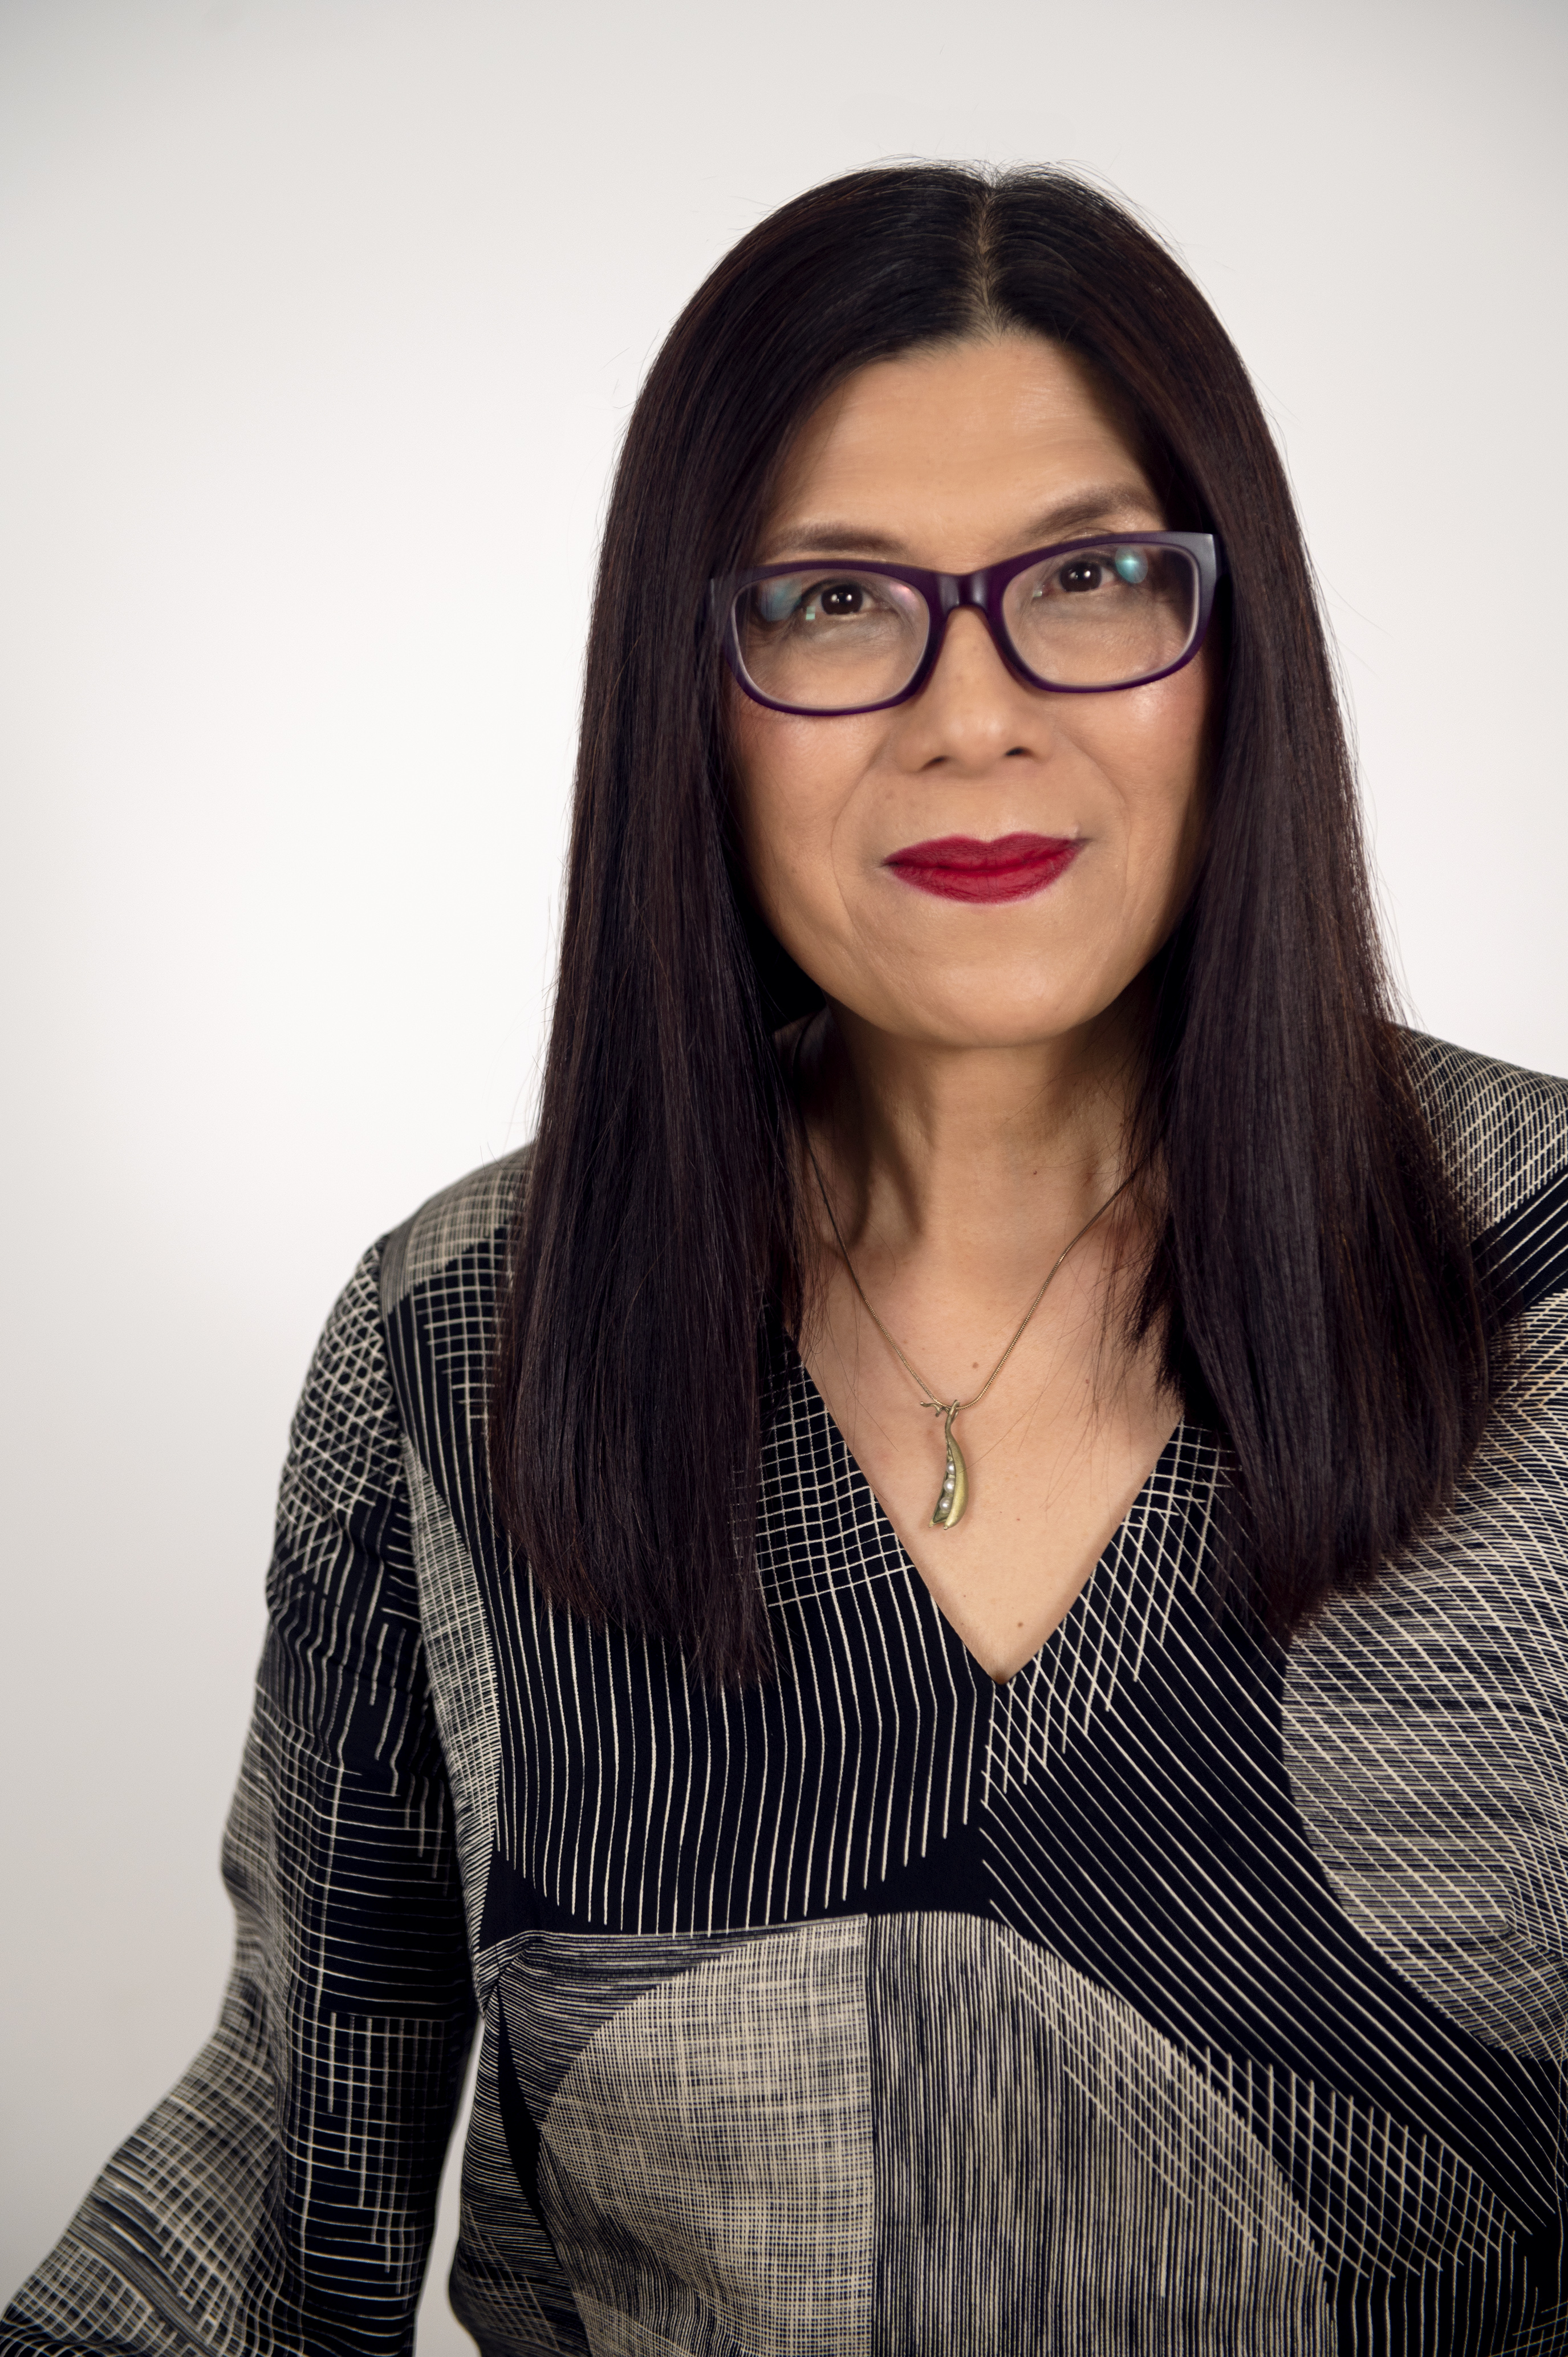 A portrait of a middle-aged Asian Australian woman with long dark hair, wearing glasses and a patterned dark shirt.